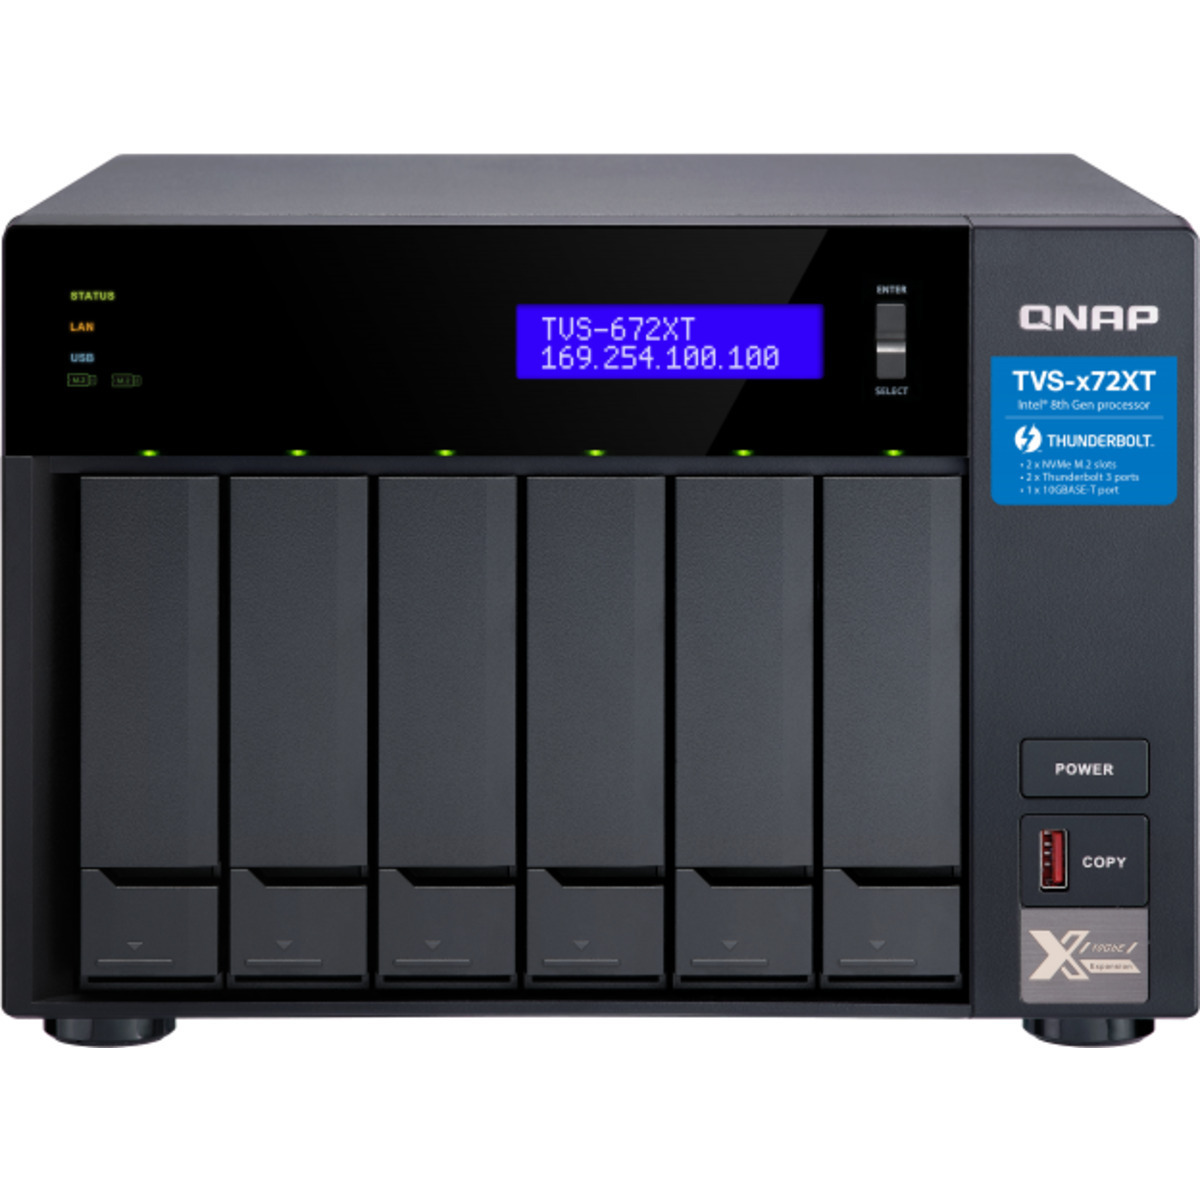 QNAP TVS-672XT Thunderbolt 3 60tb 6-Bay Desktop Multimedia / Power User / Business DAS-NAS - Combo Direct + Network Storage Device 6x10tb Seagate IronWolf Pro ST10000NT001 3.5 7200rpm SATA 6Gb/s HDD NAS Class Drives Installed - Burn-In Tested - ON SALE TVS-672XT Thunderbolt 3